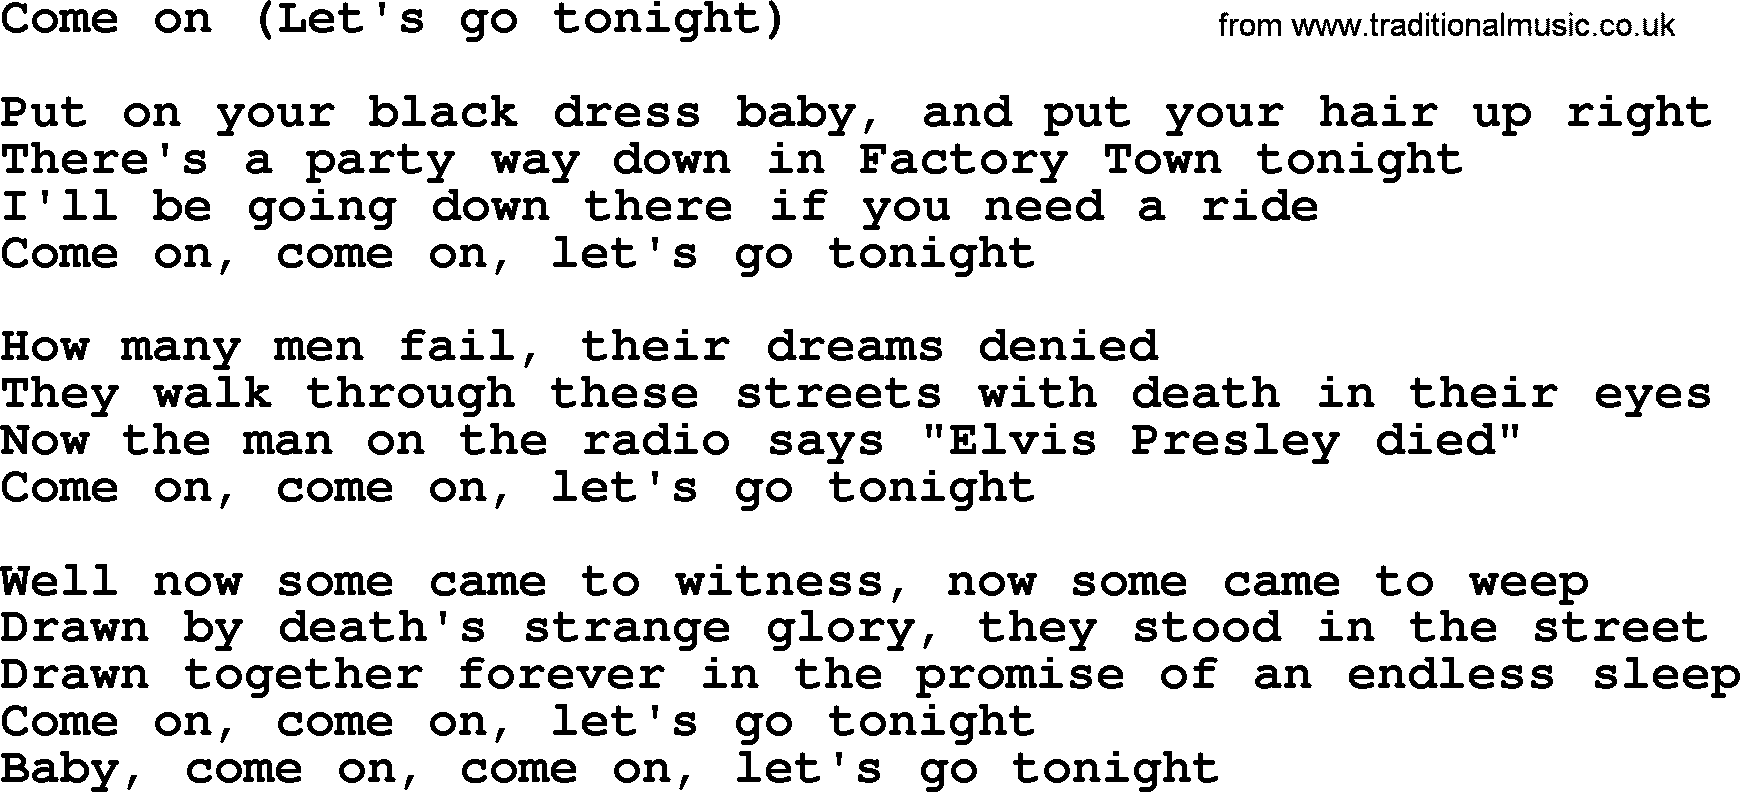 Bruce Springsteen song: Come On(Let's Go Tonight) lyrics